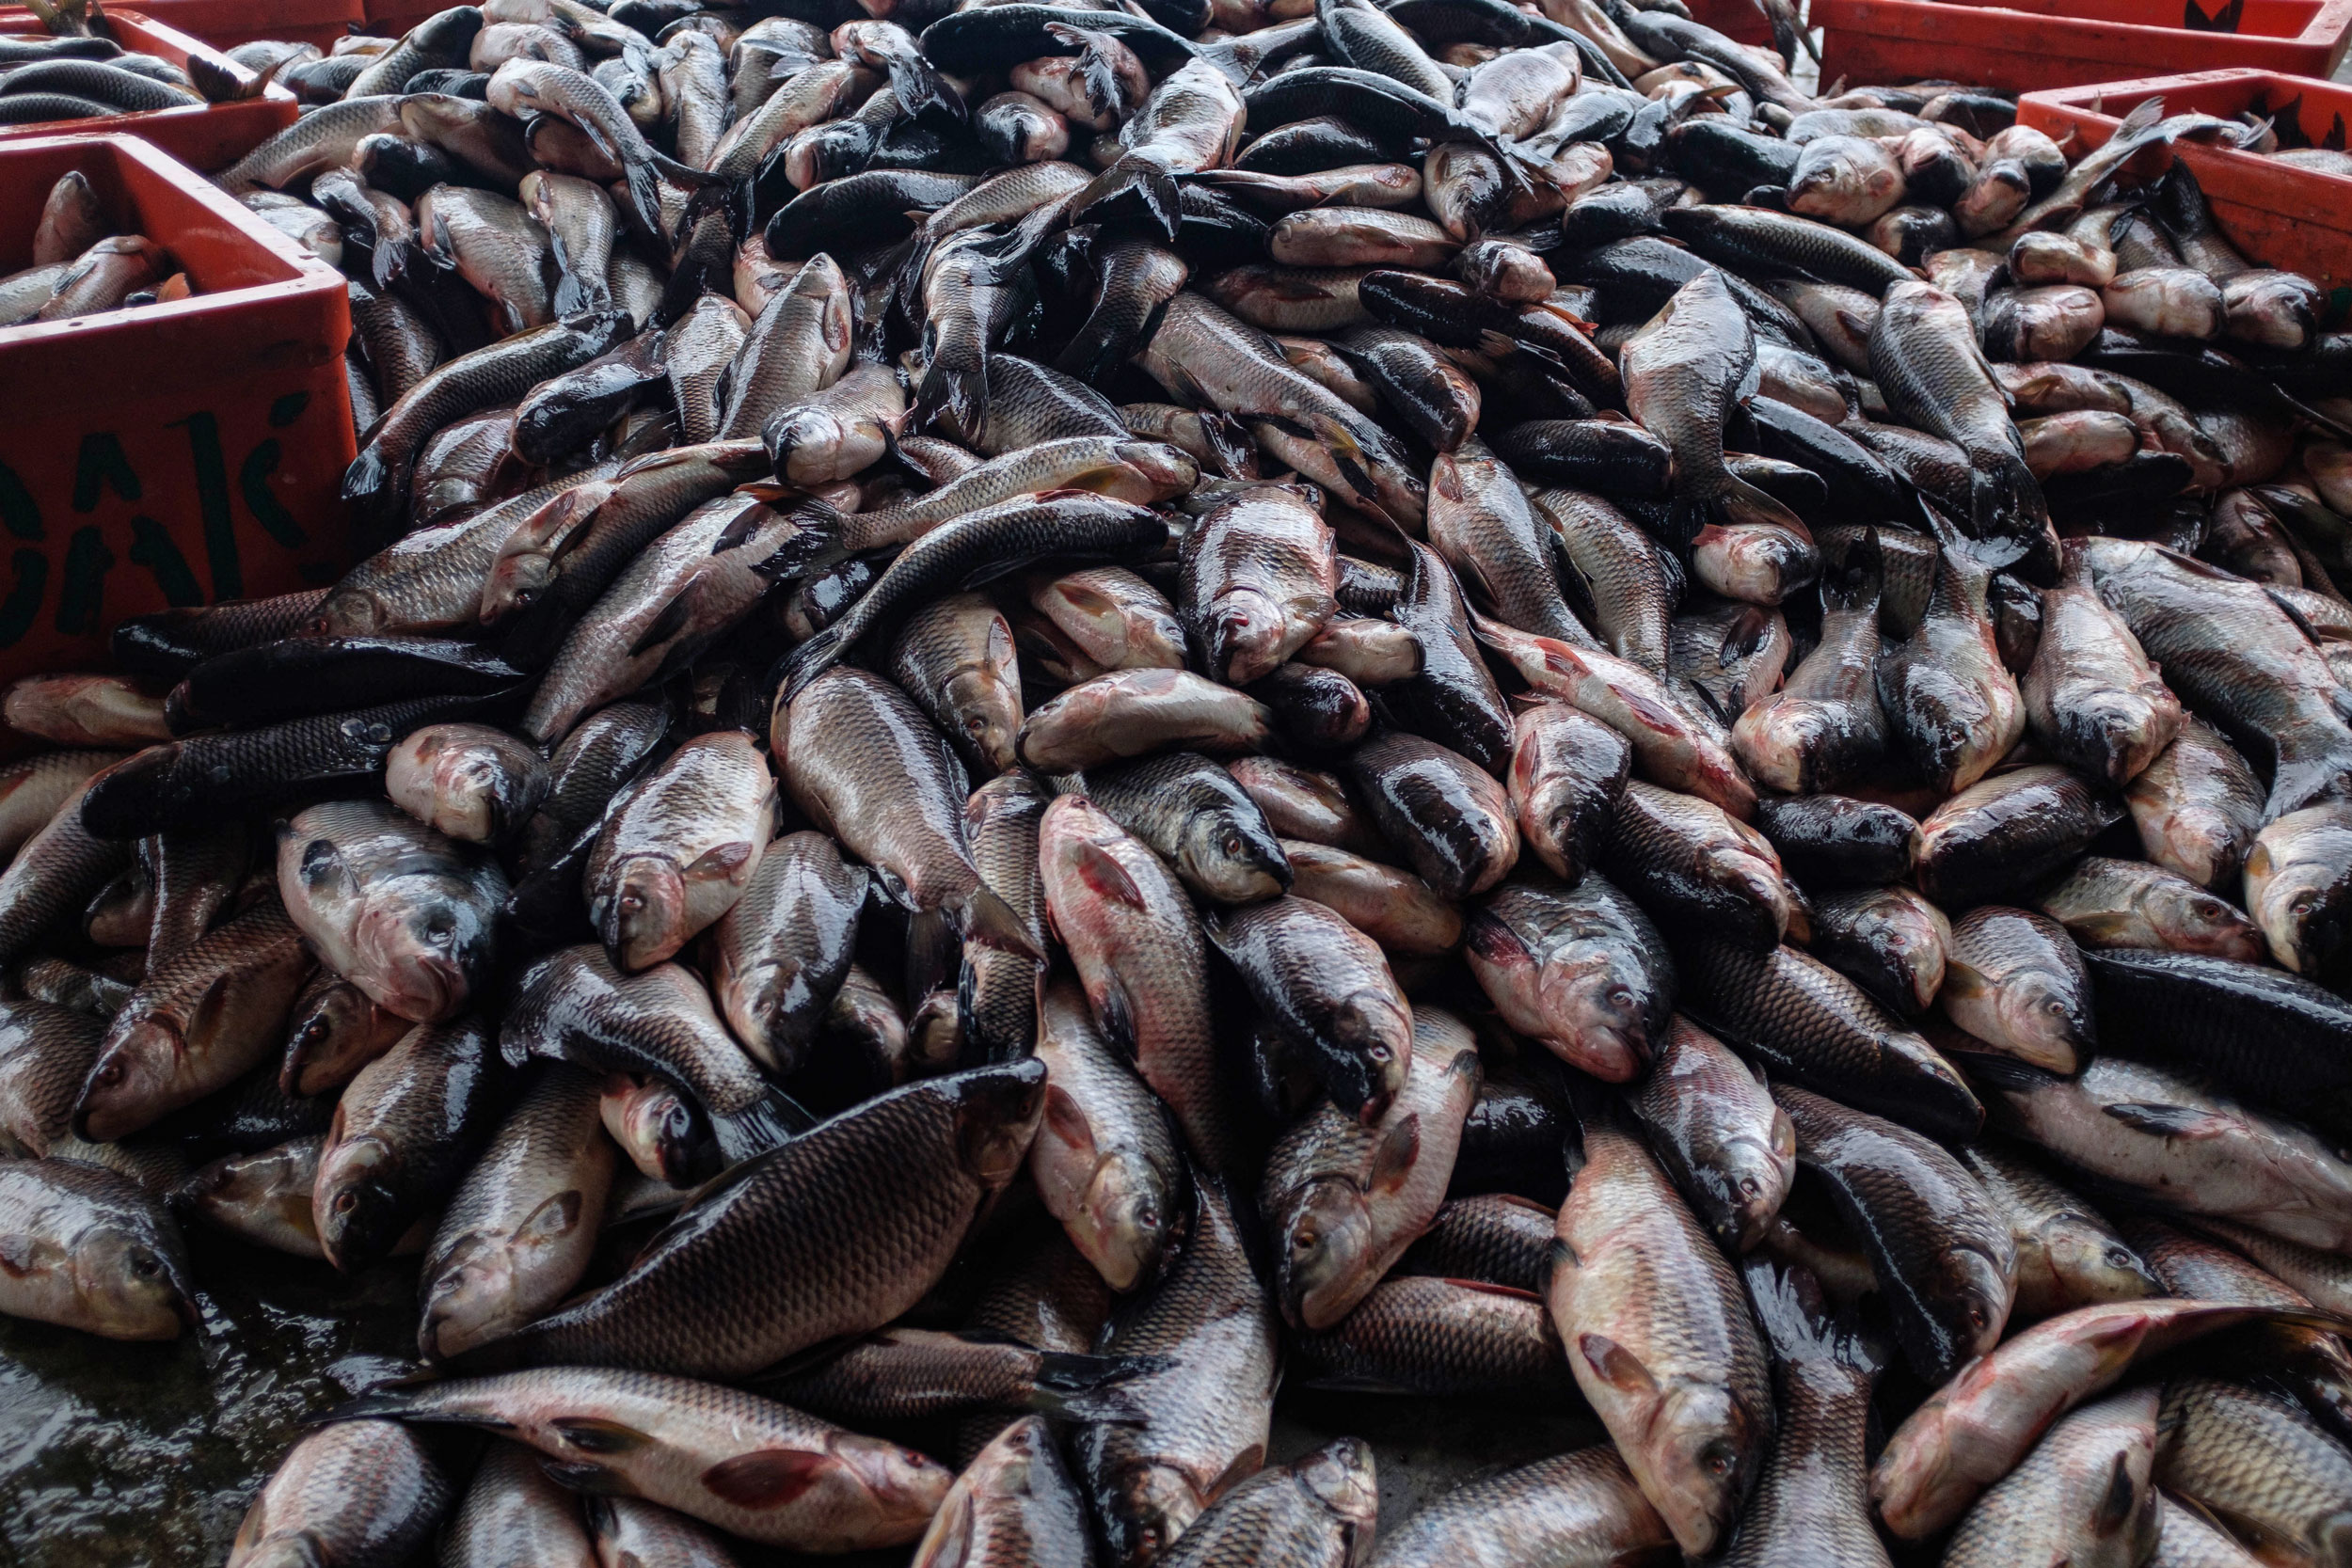 wholesale fish suppliers near me